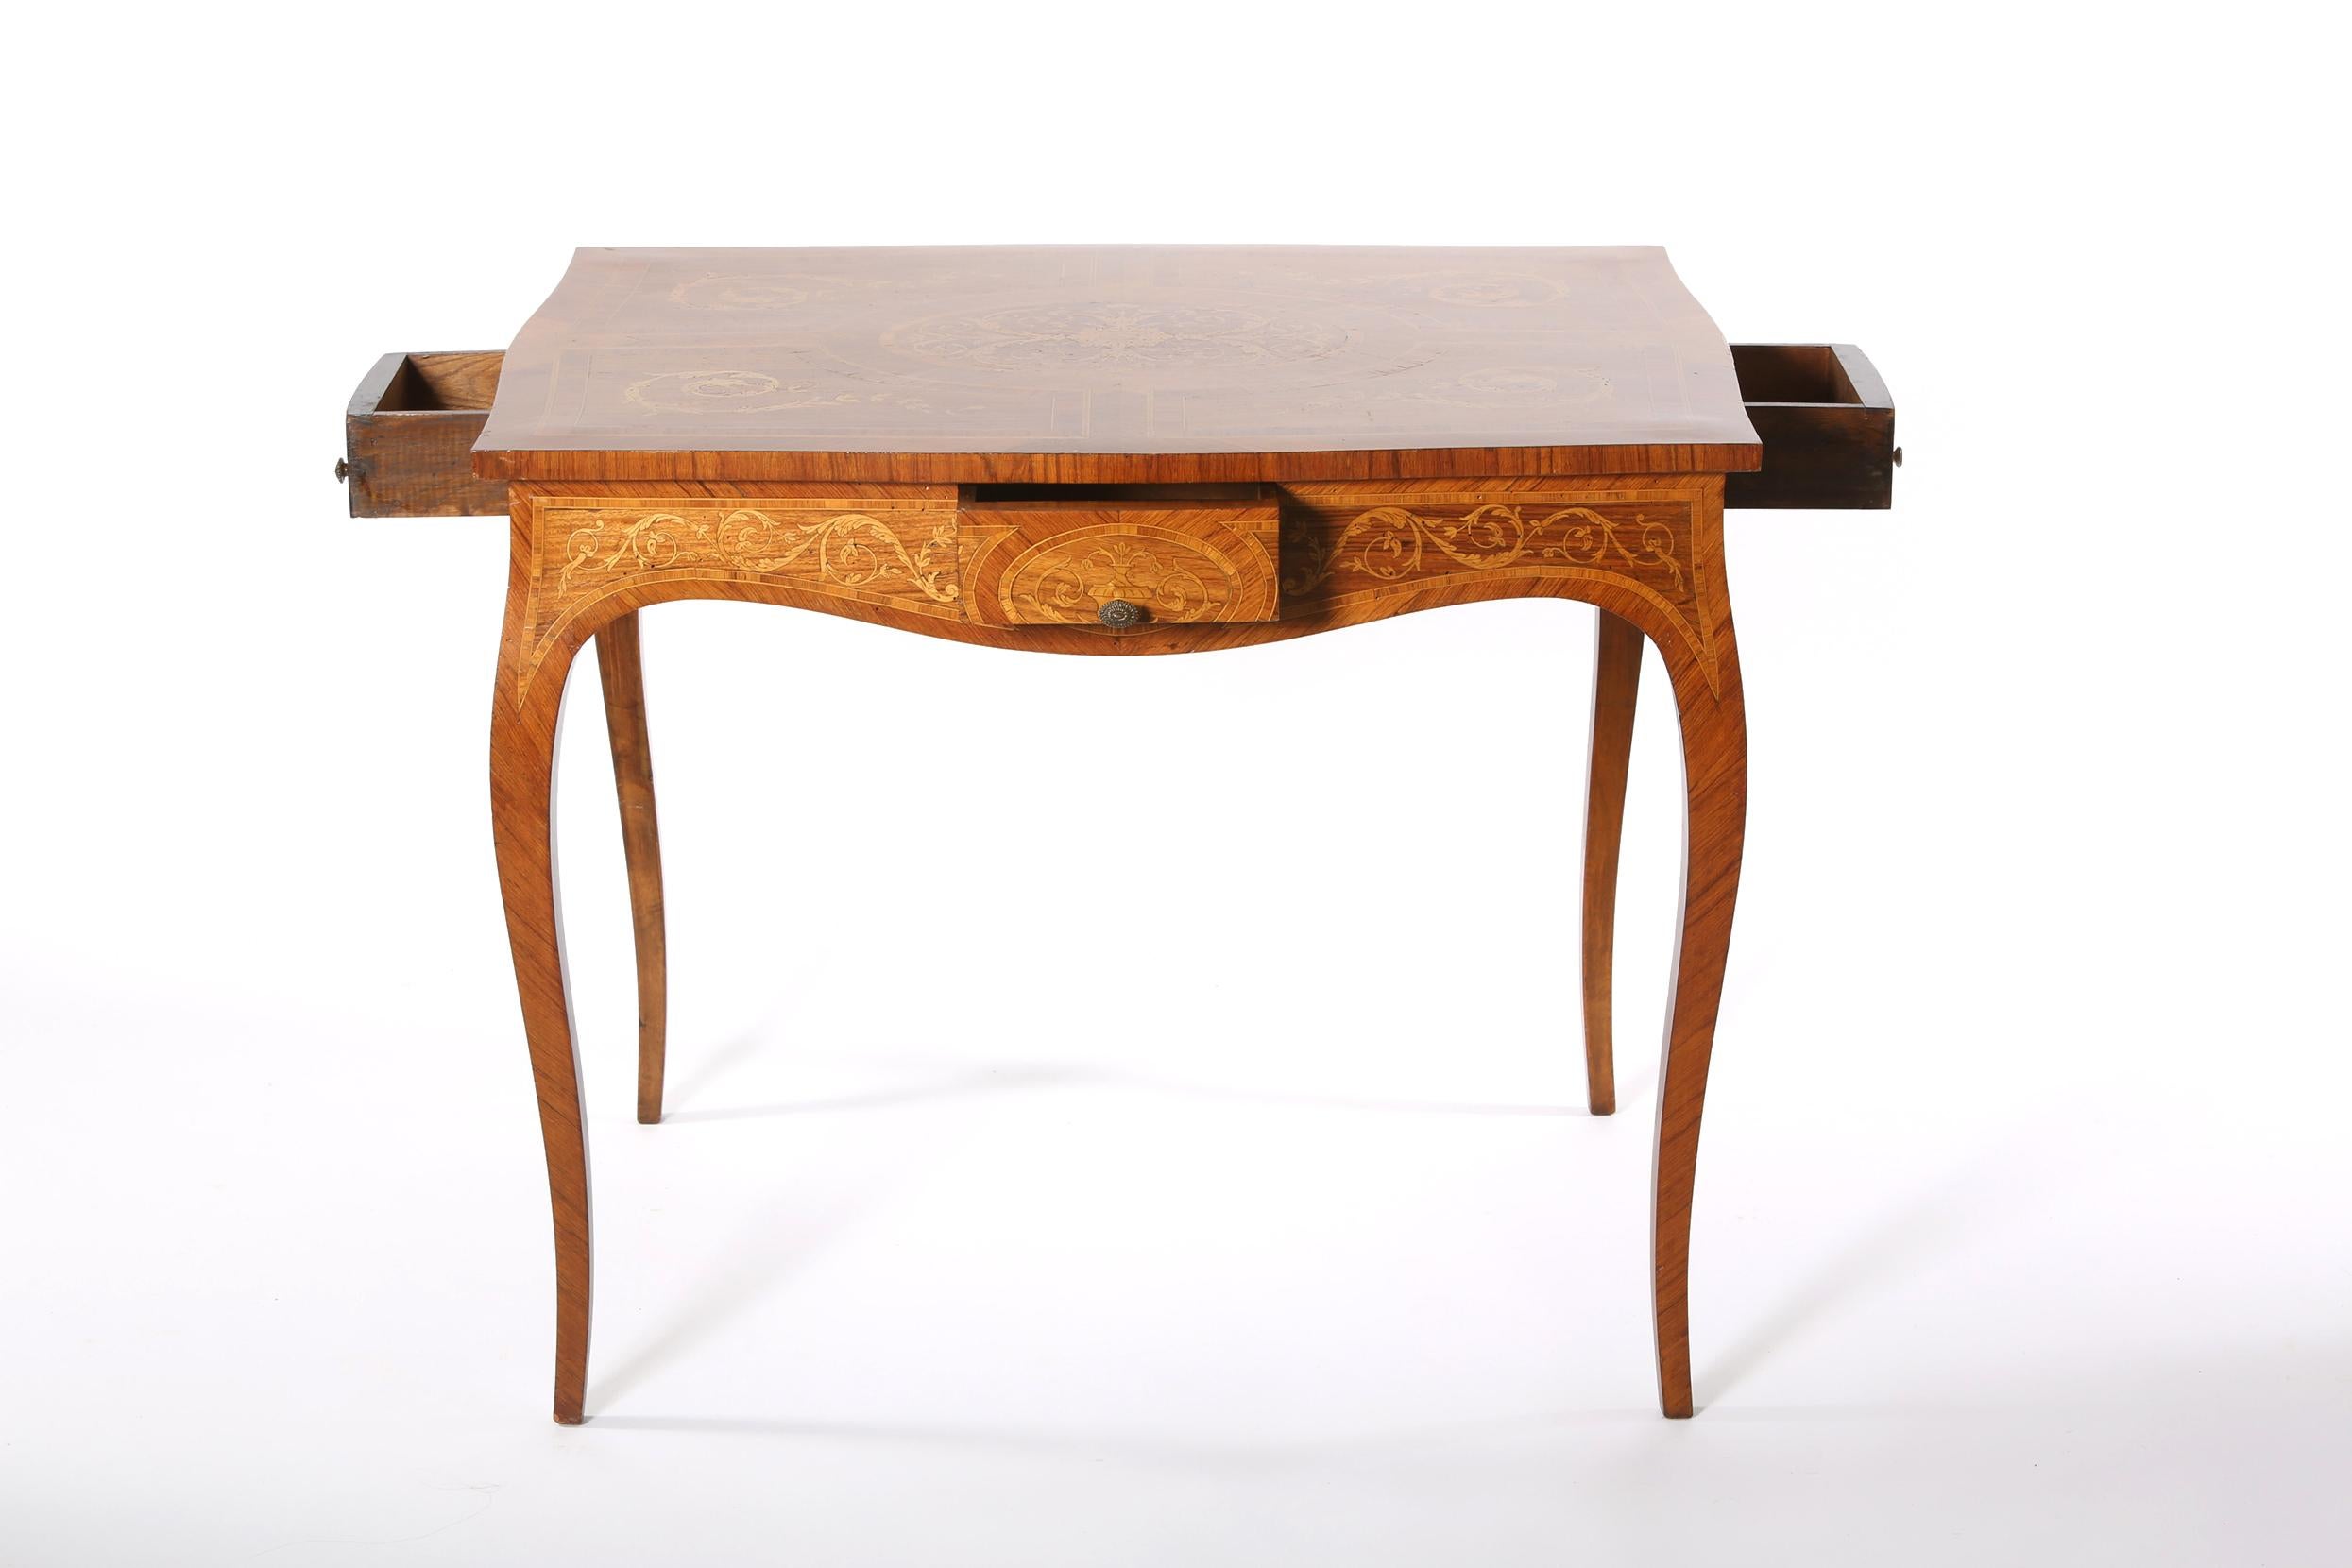 19th century Dutch marquetry center or vanity table with four sides drawer. The table is in good antique condition with wear appropriate to age or use. The table stand about 30 inches high x 36 inches length x 29 inches wide.